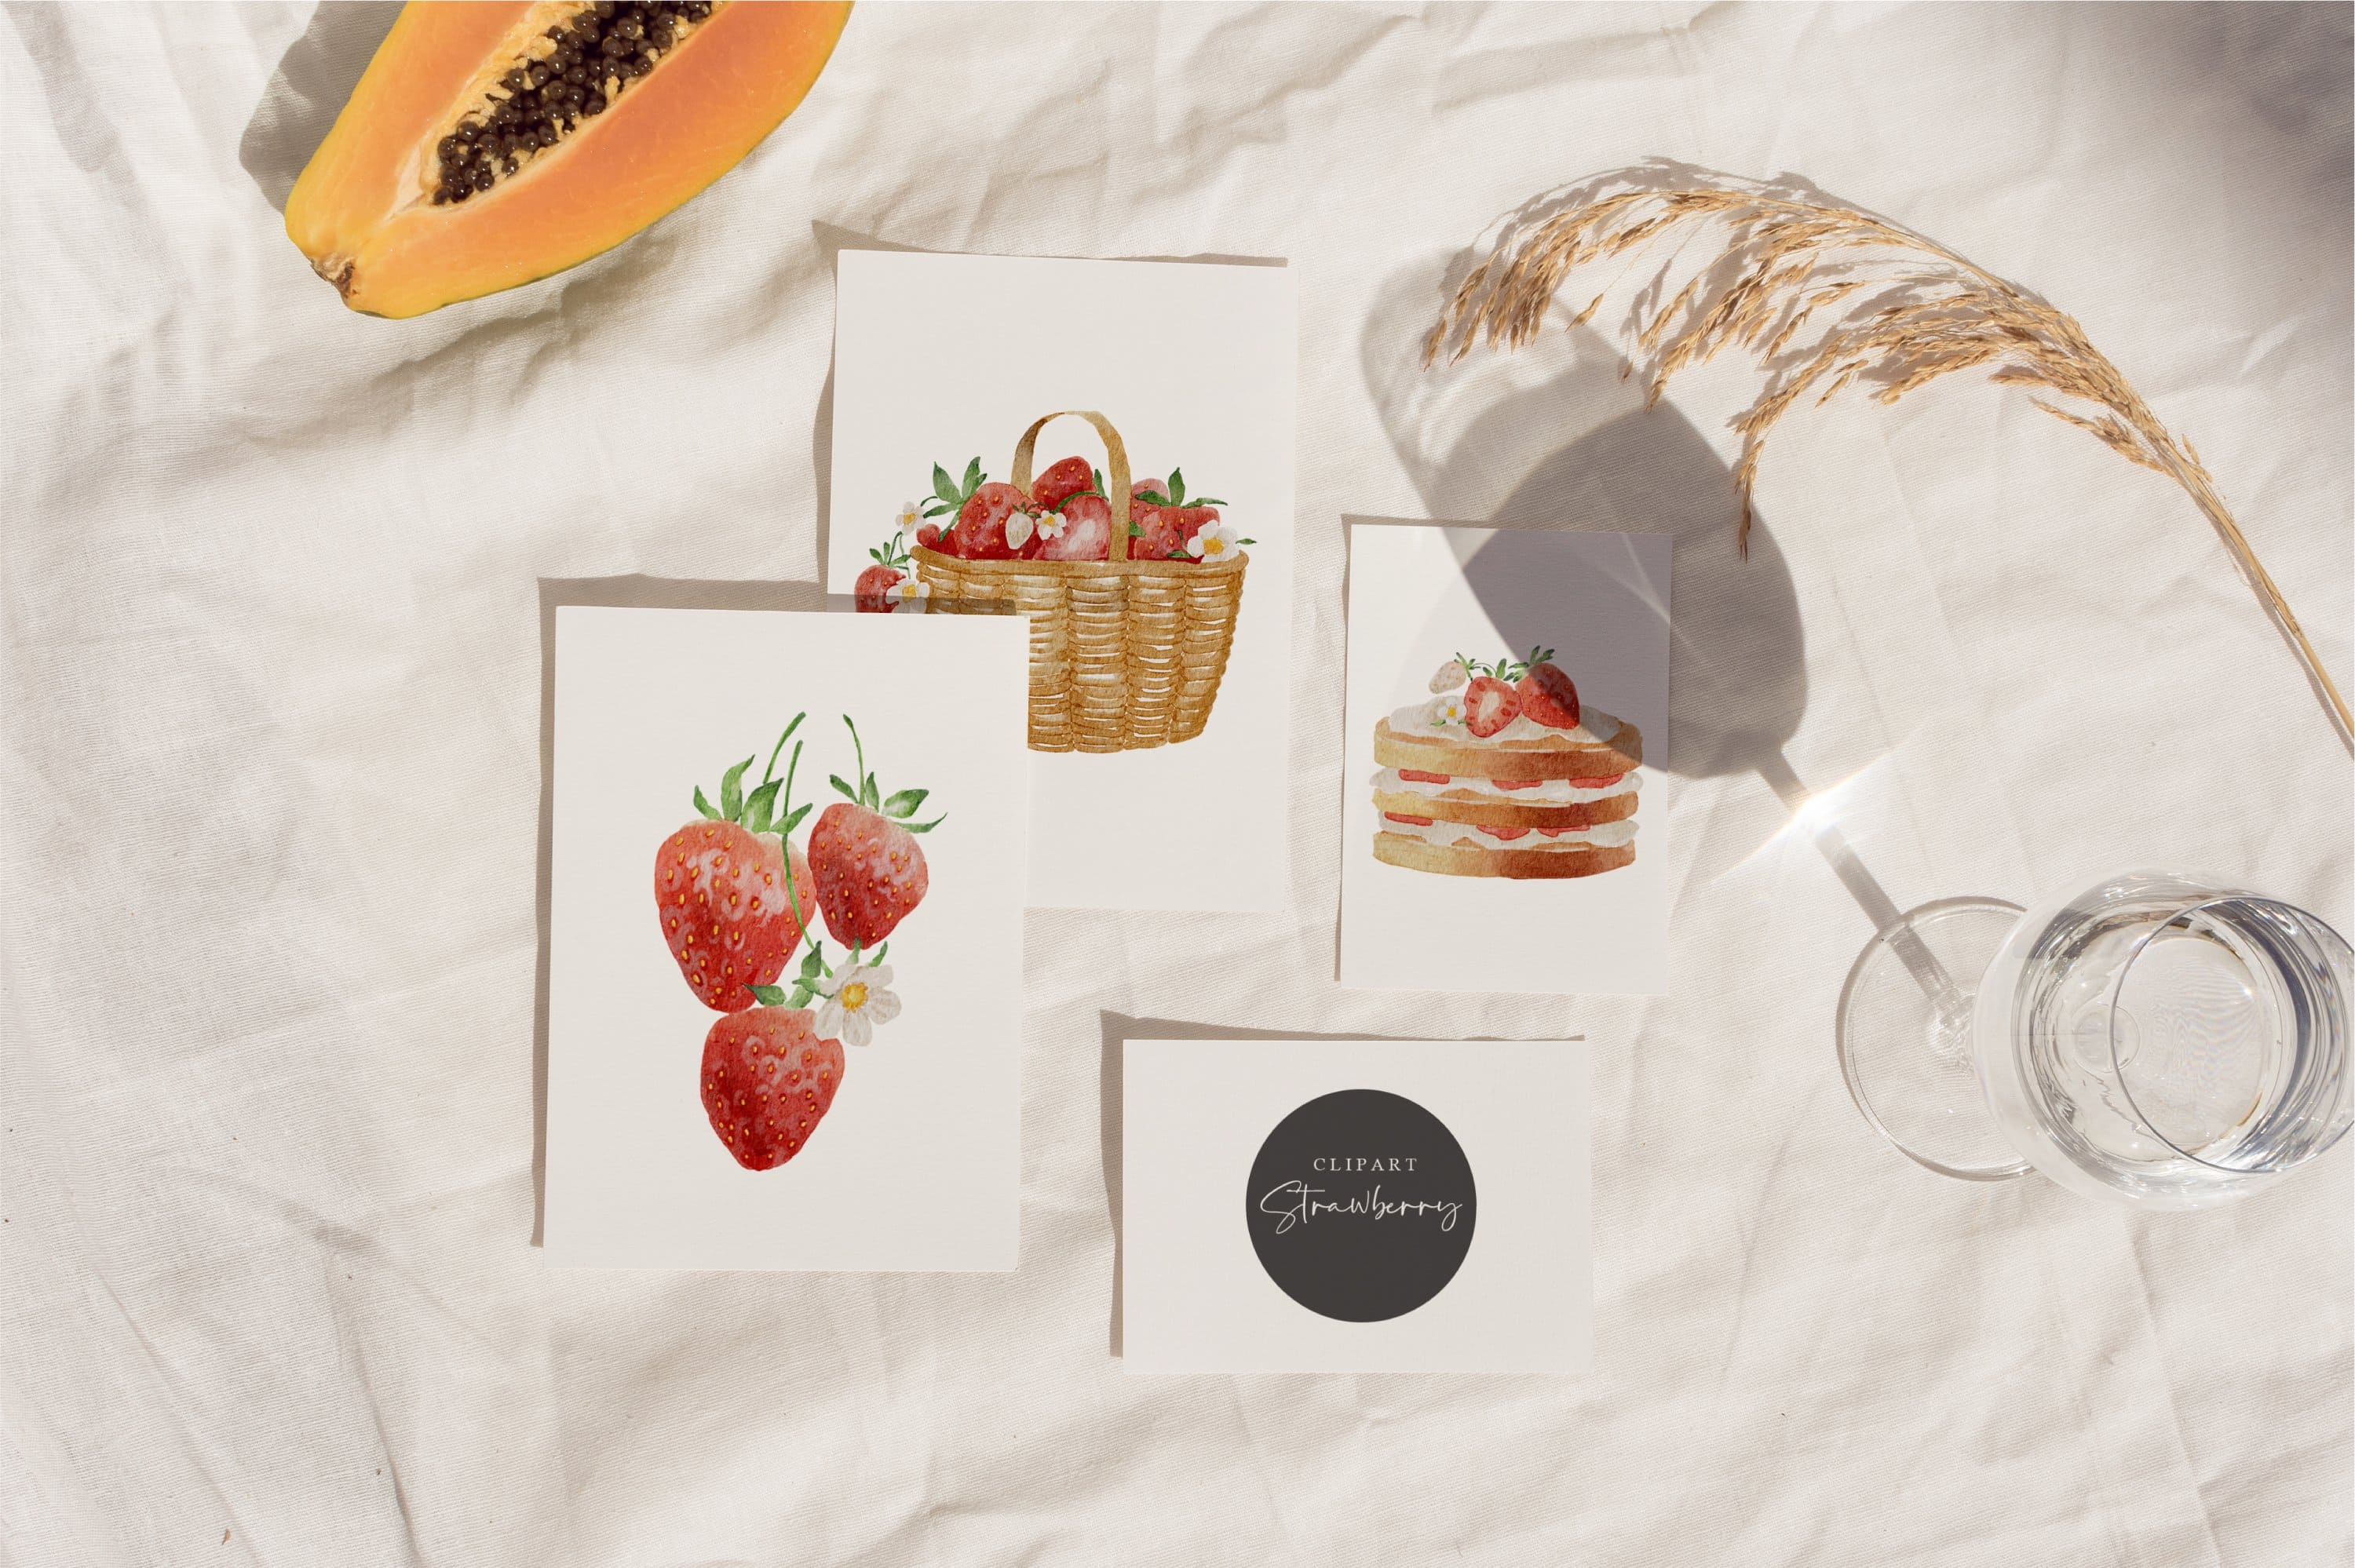 Three cards with drawn watercolor strawberries, a basket with strawberries and a cake with strawberries.